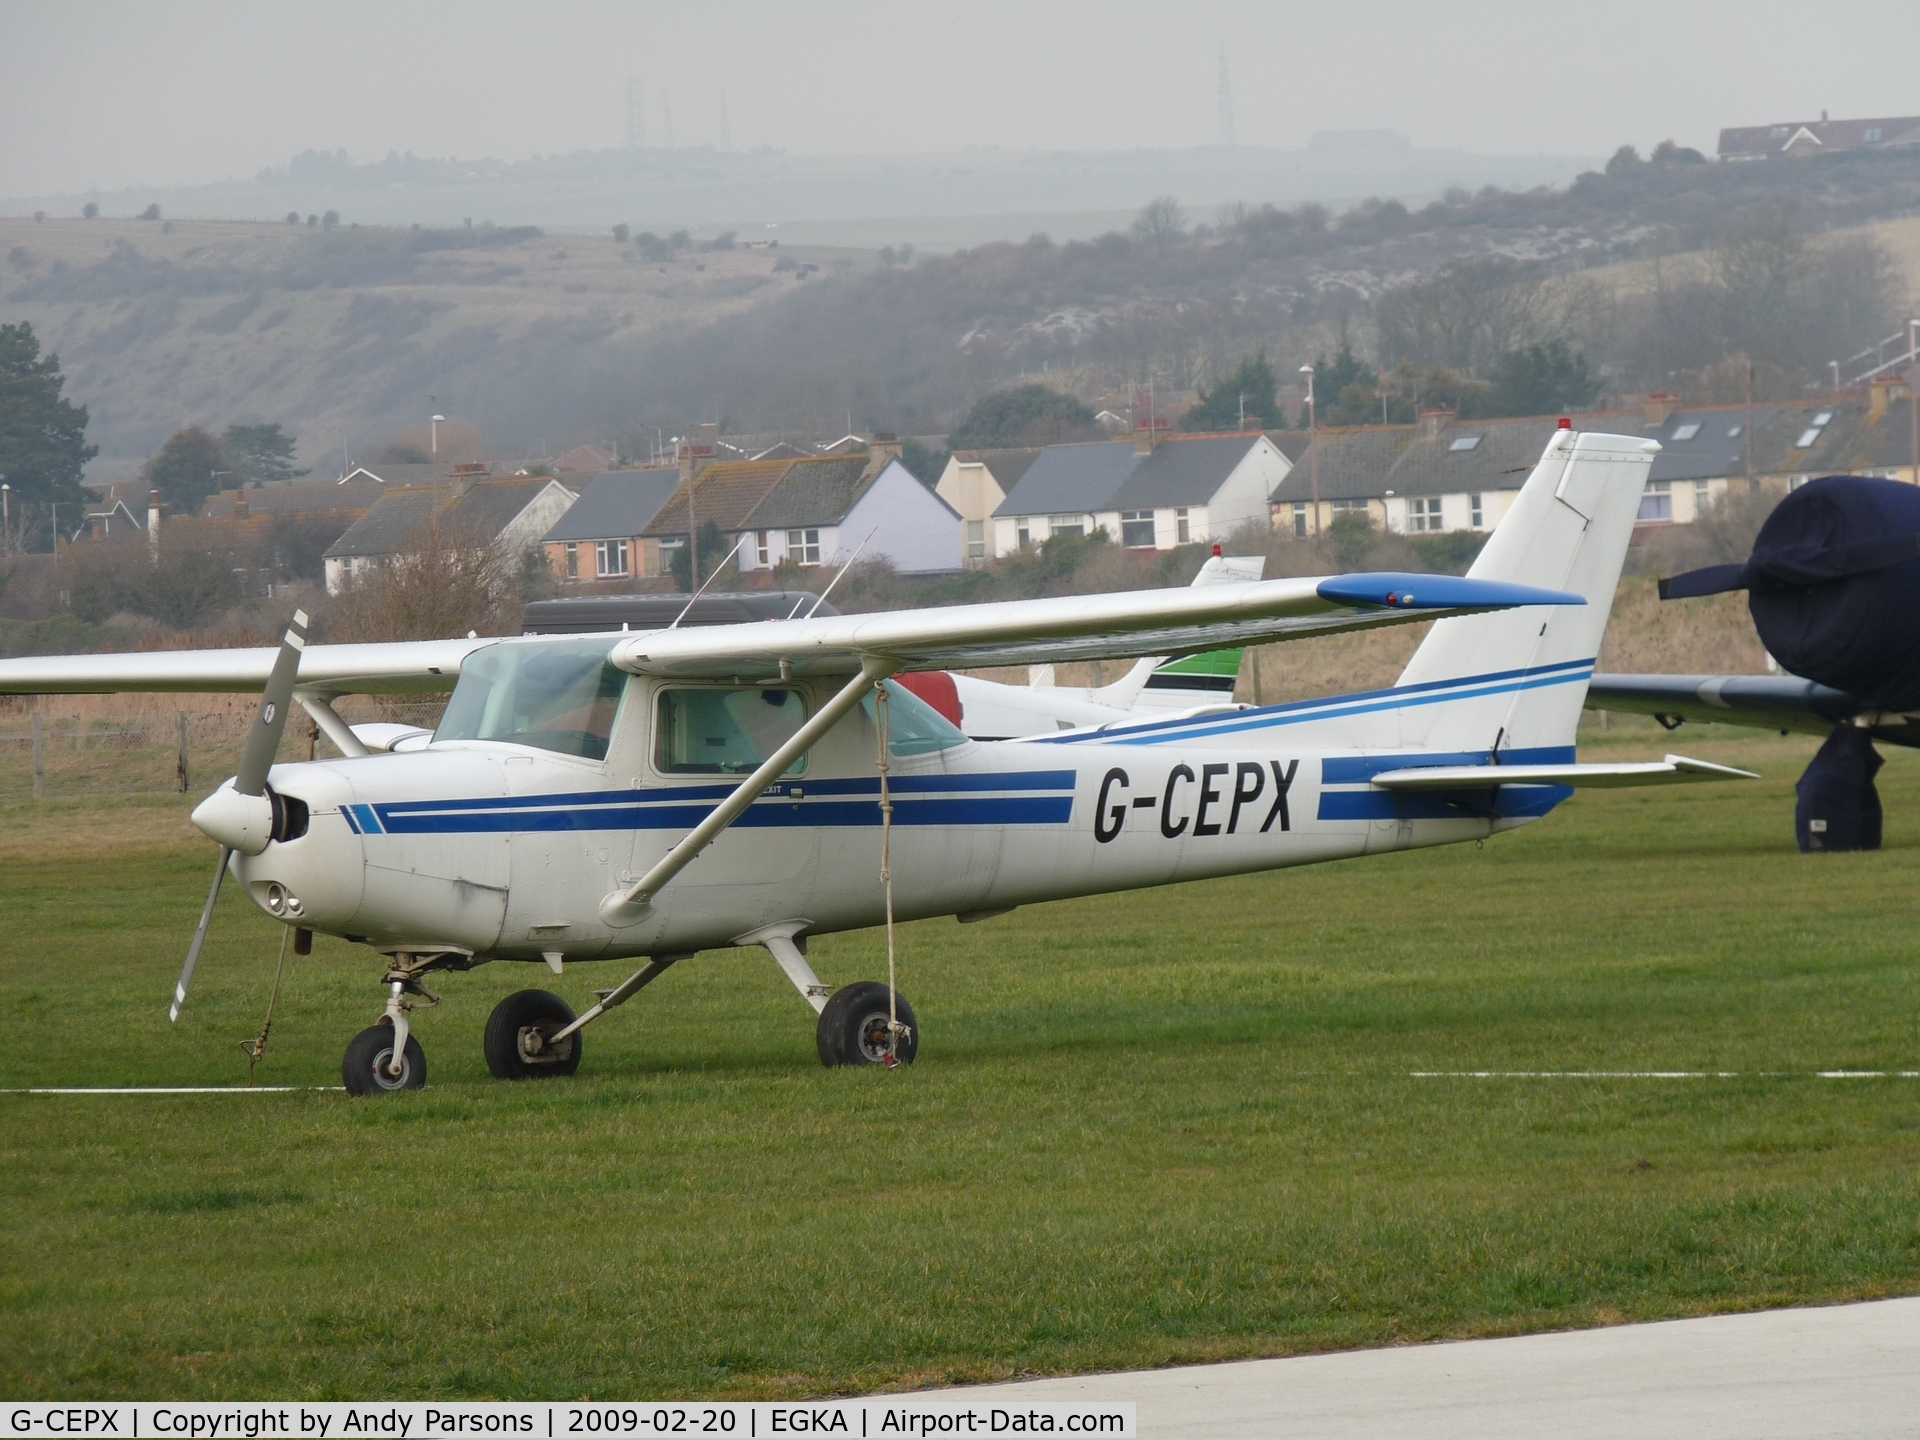 G-CEPX, 1983 Cessna 152 C/N 152-85792, G-CEPX at Shoreham